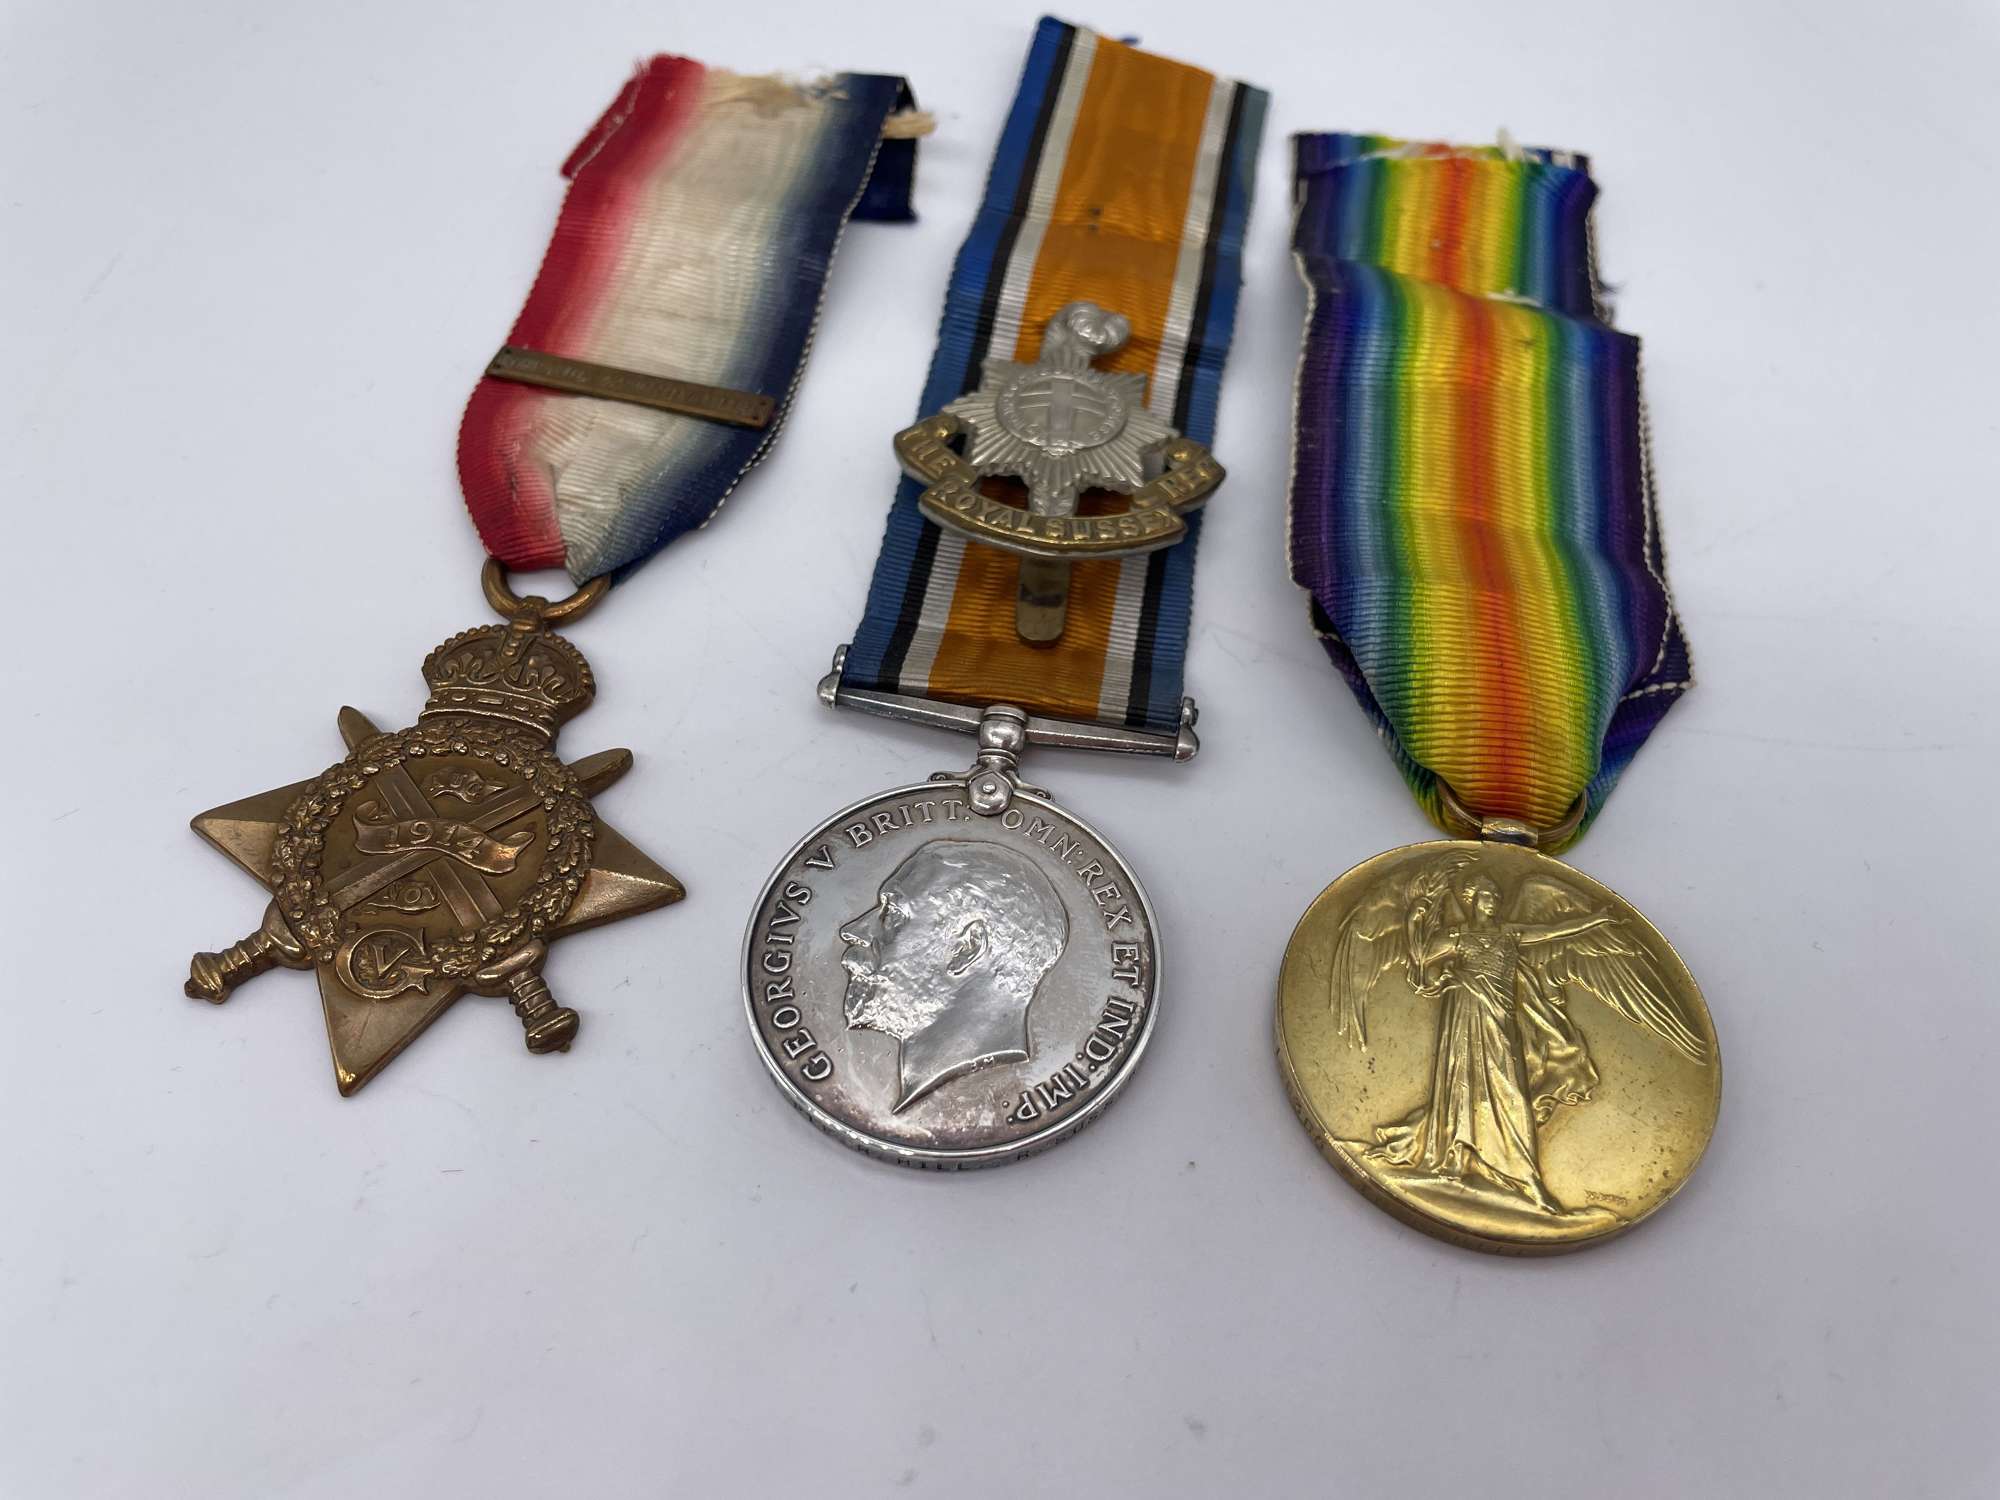 Original World War One Mons Star Medal Trio, Pte Hill, 2/Royal Sussex R., Killed in Action